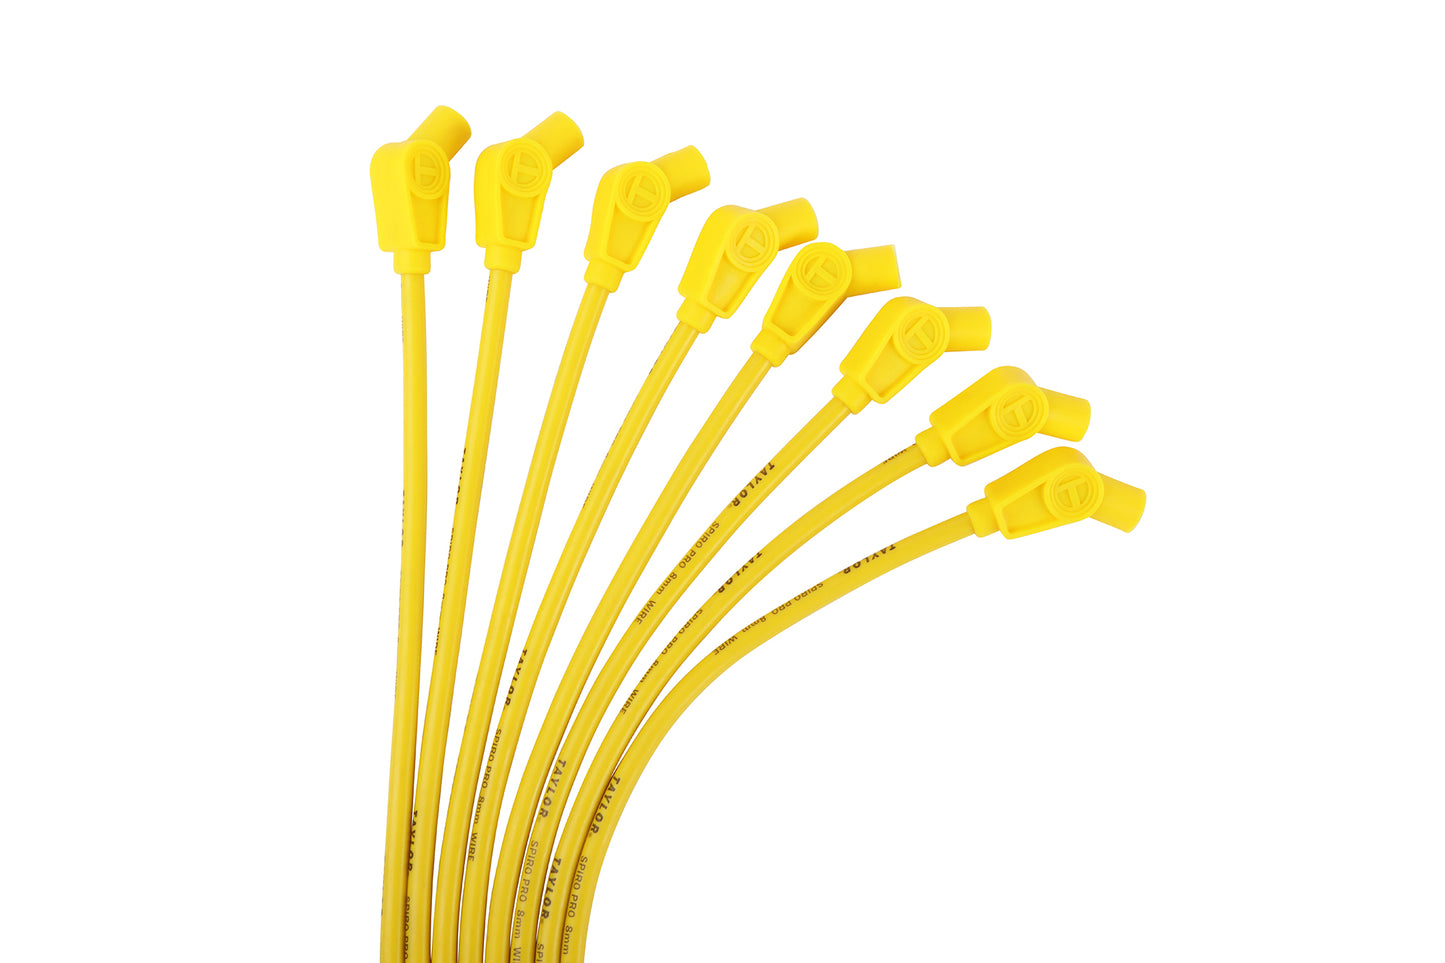 Taylor Cable 73453 8mm Spiro-Pro univ 8 cyl 135 Yellow